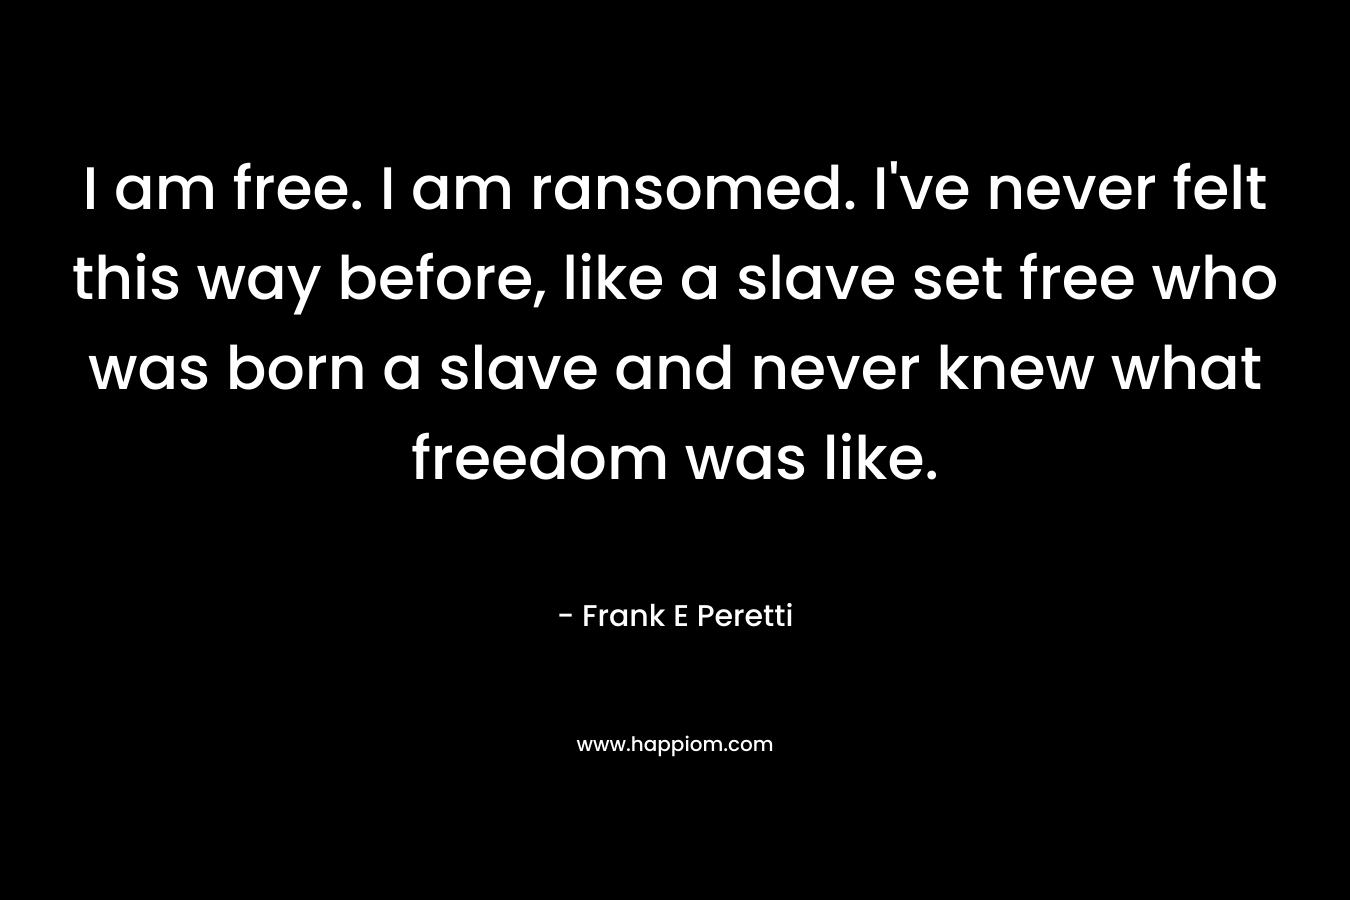 I am free. I am ransomed. I’ve never felt this way before, like a slave set free who was born a slave and never knew what freedom was like. – Frank E Peretti